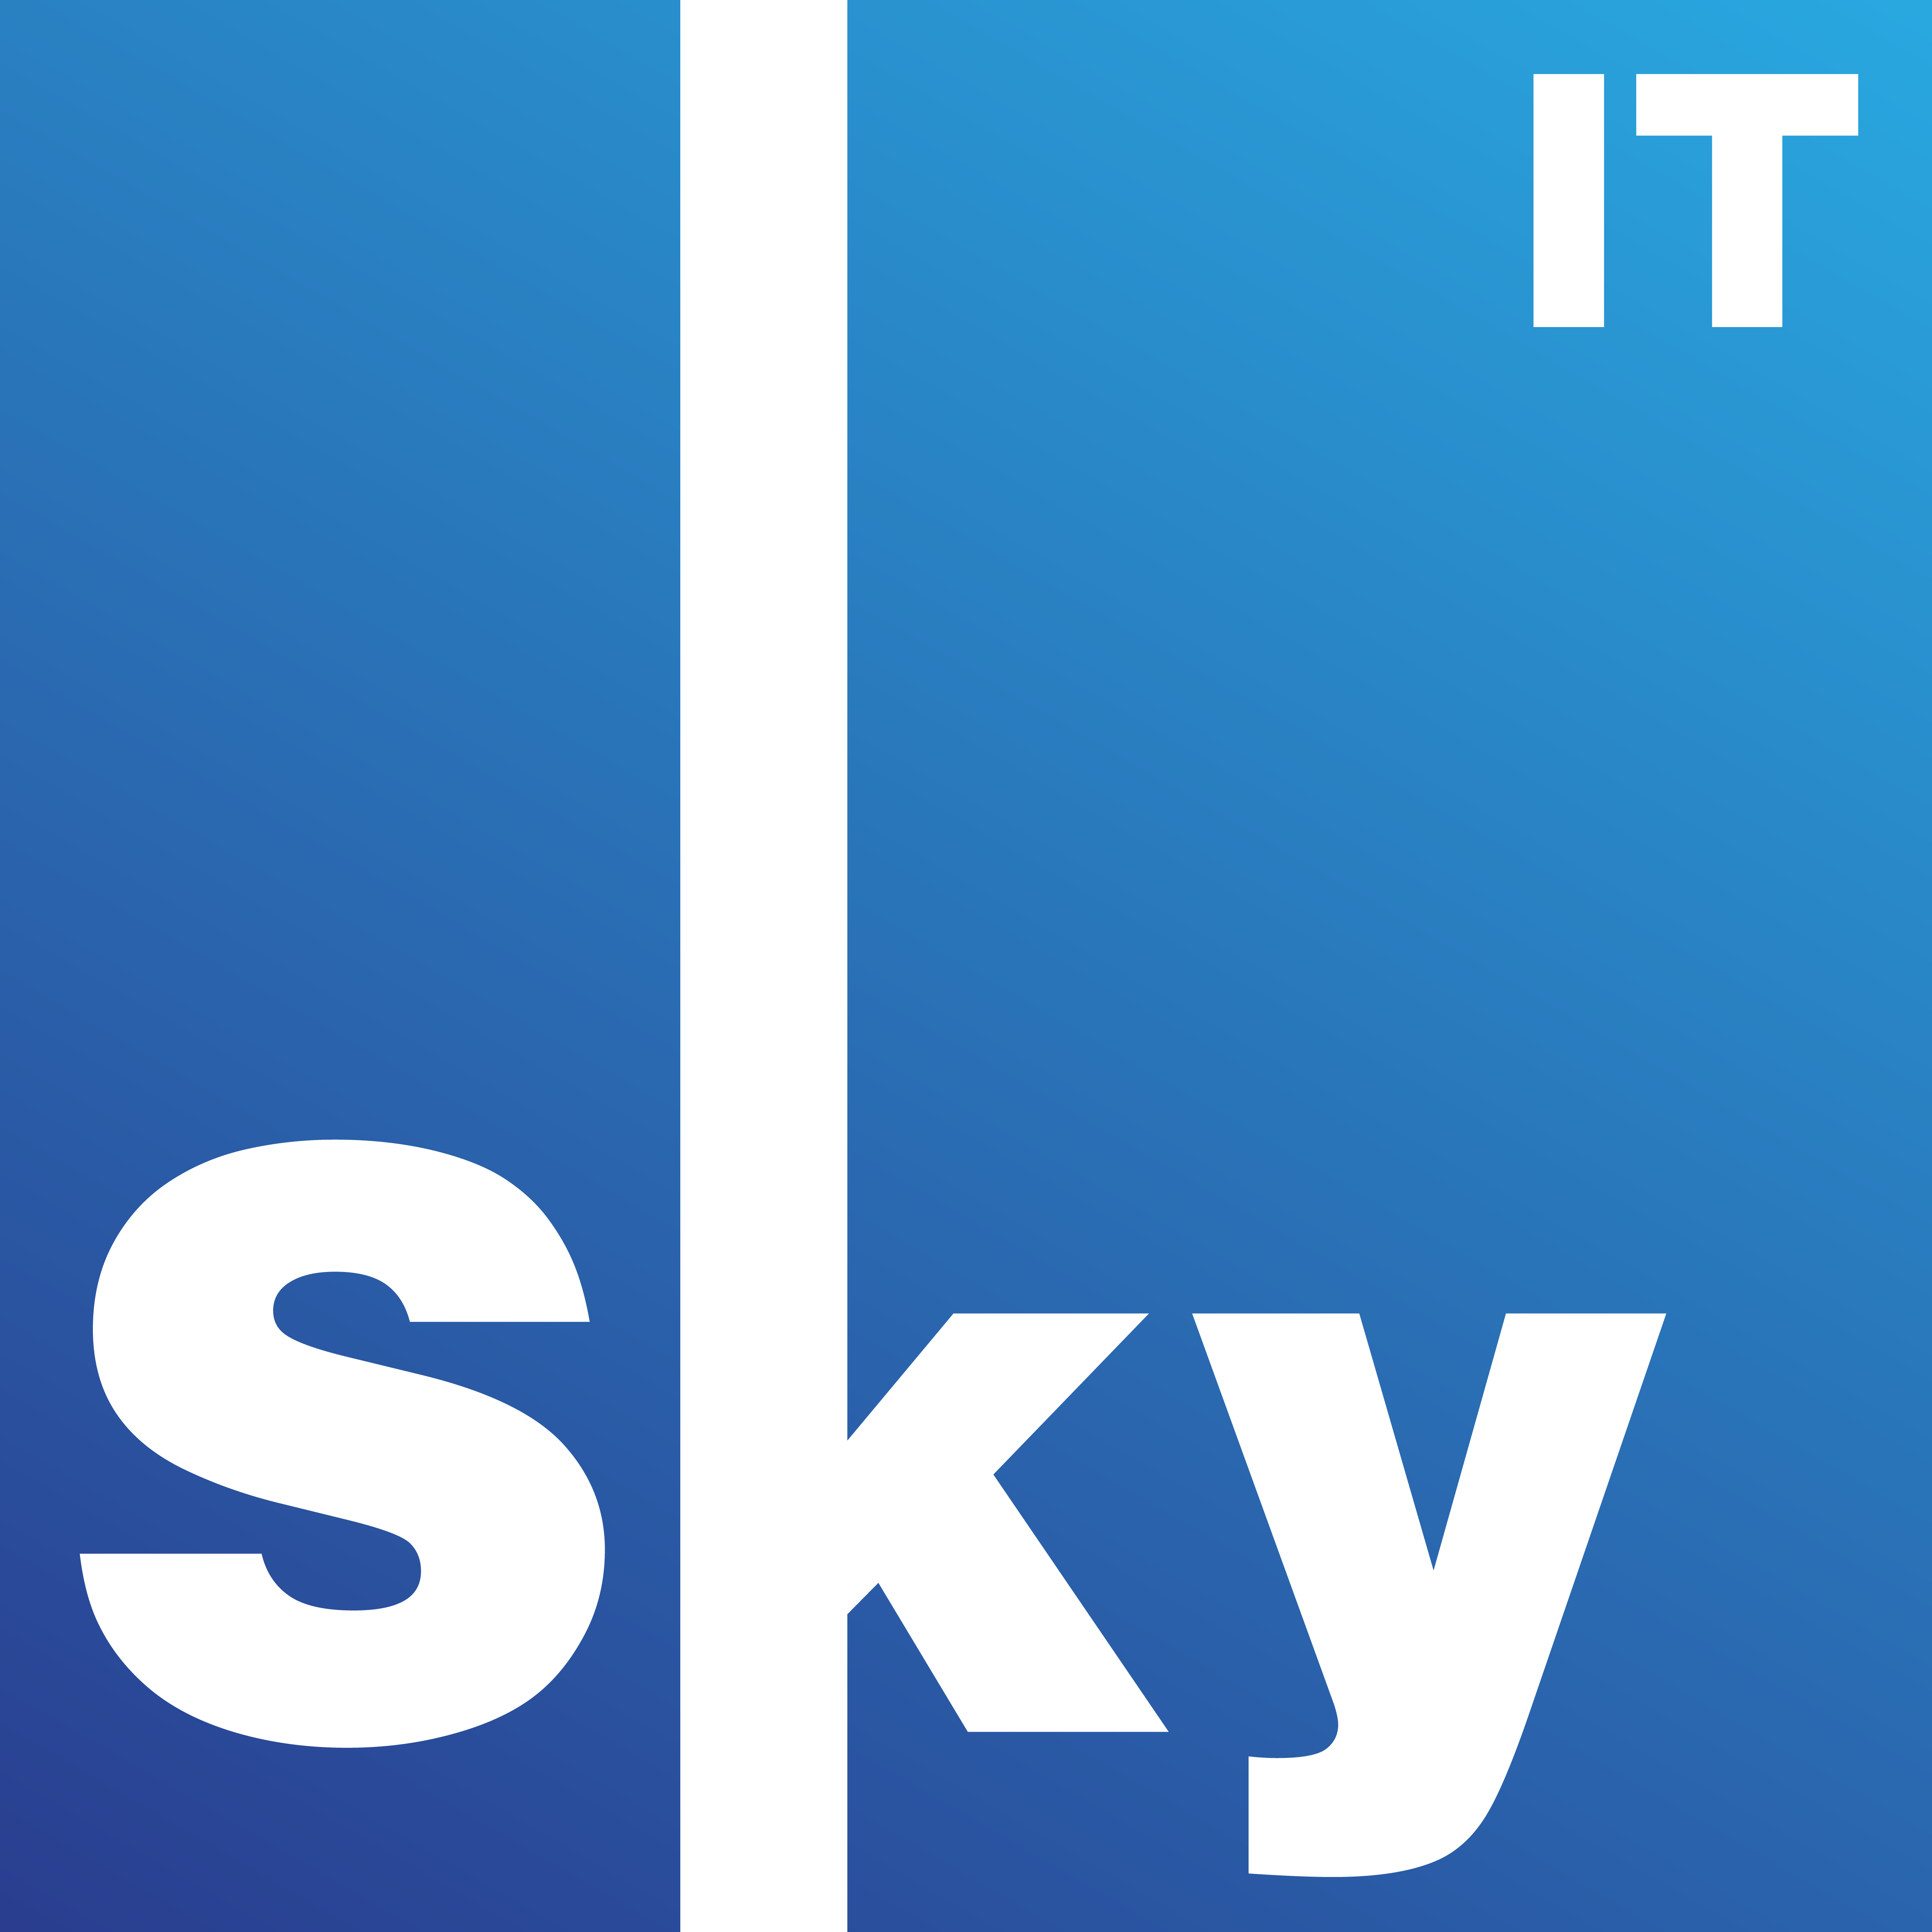 Chat sky live Live chat